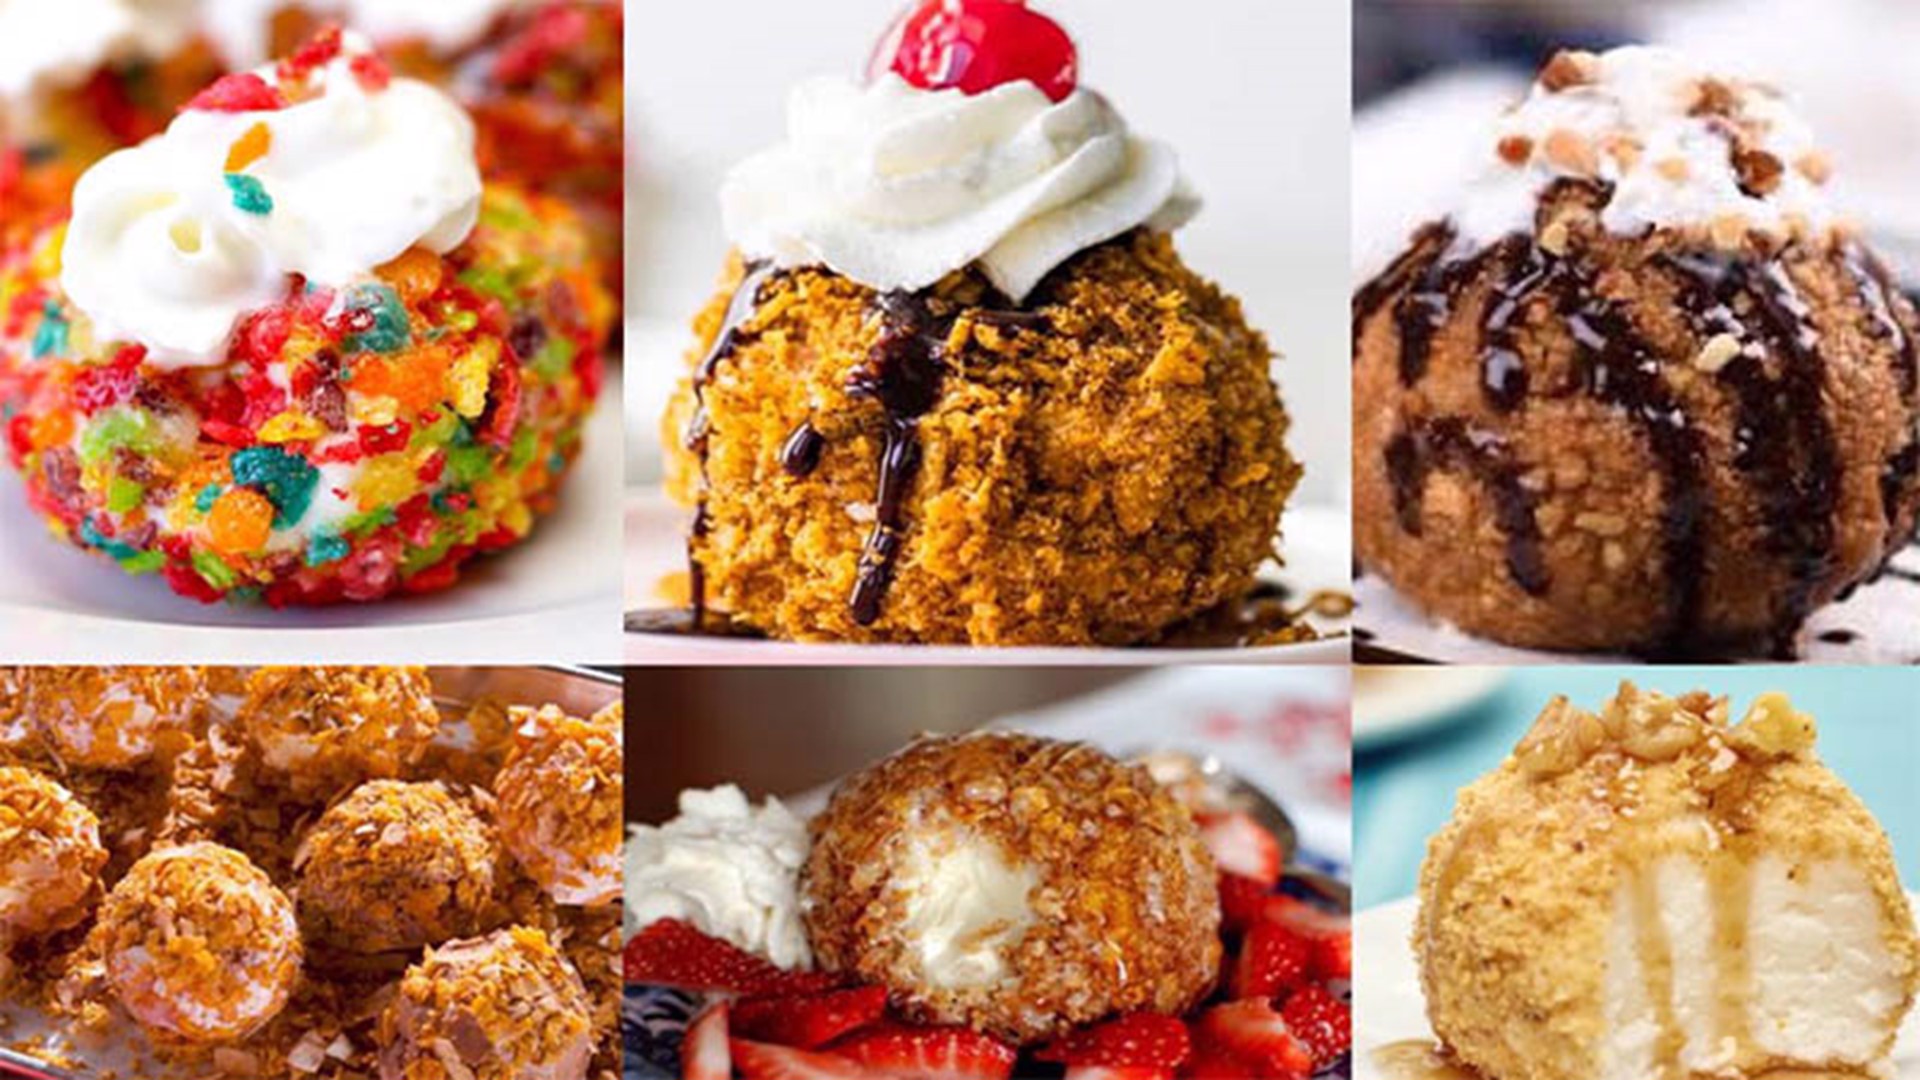 Chef Kevin Belton shows you how to make fried ice cream treats.